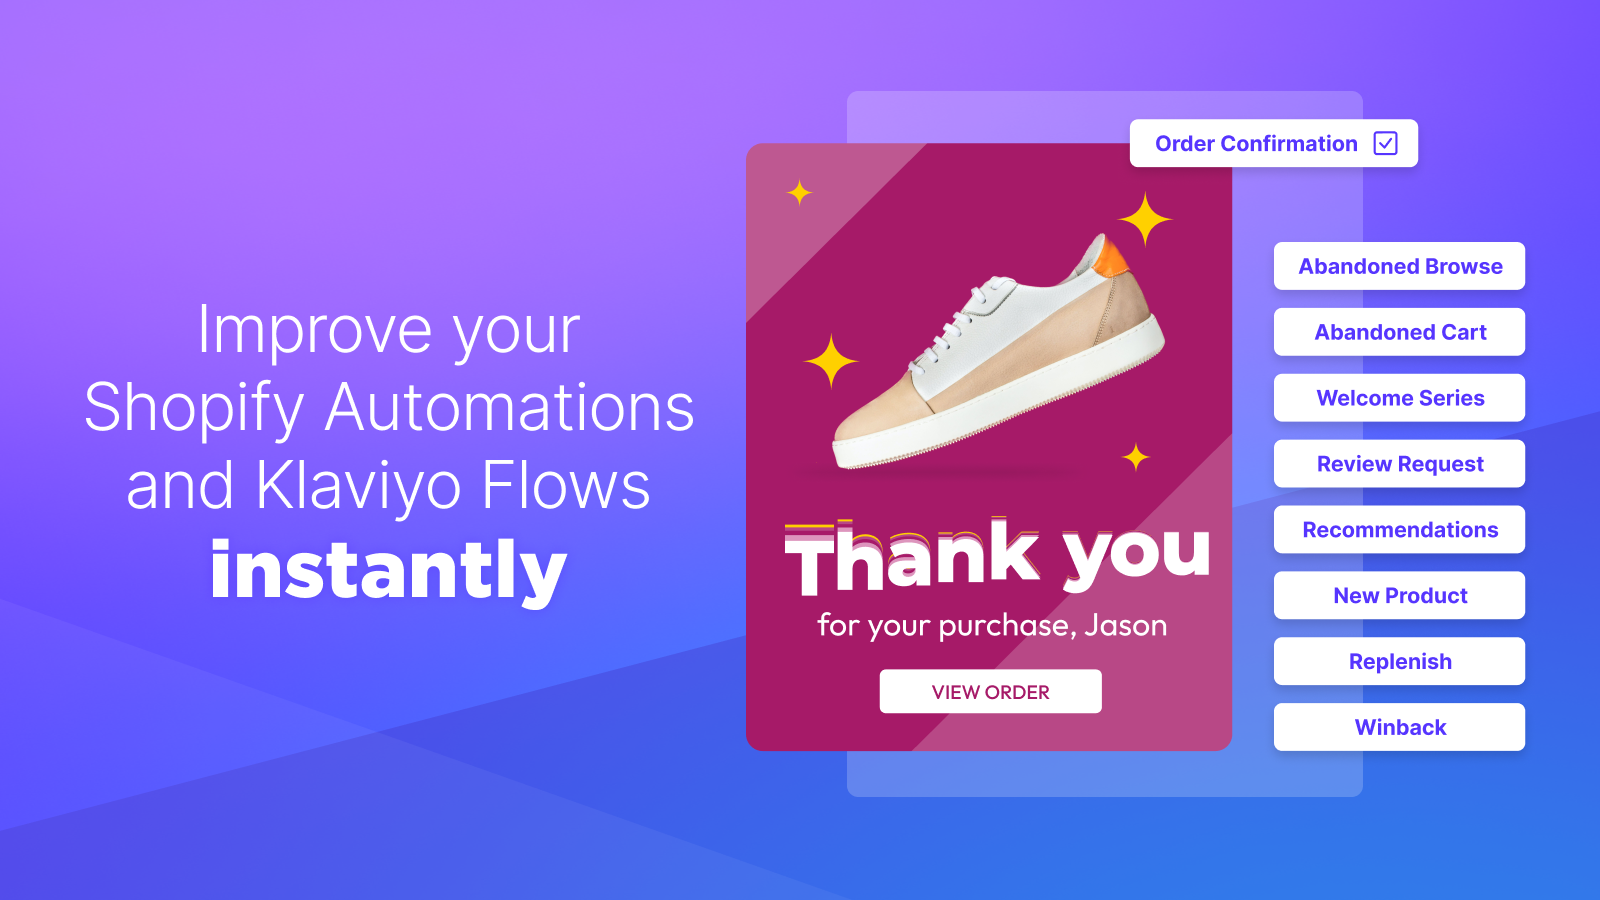 Improve your Shopify automations and Klaviyo flows instantly